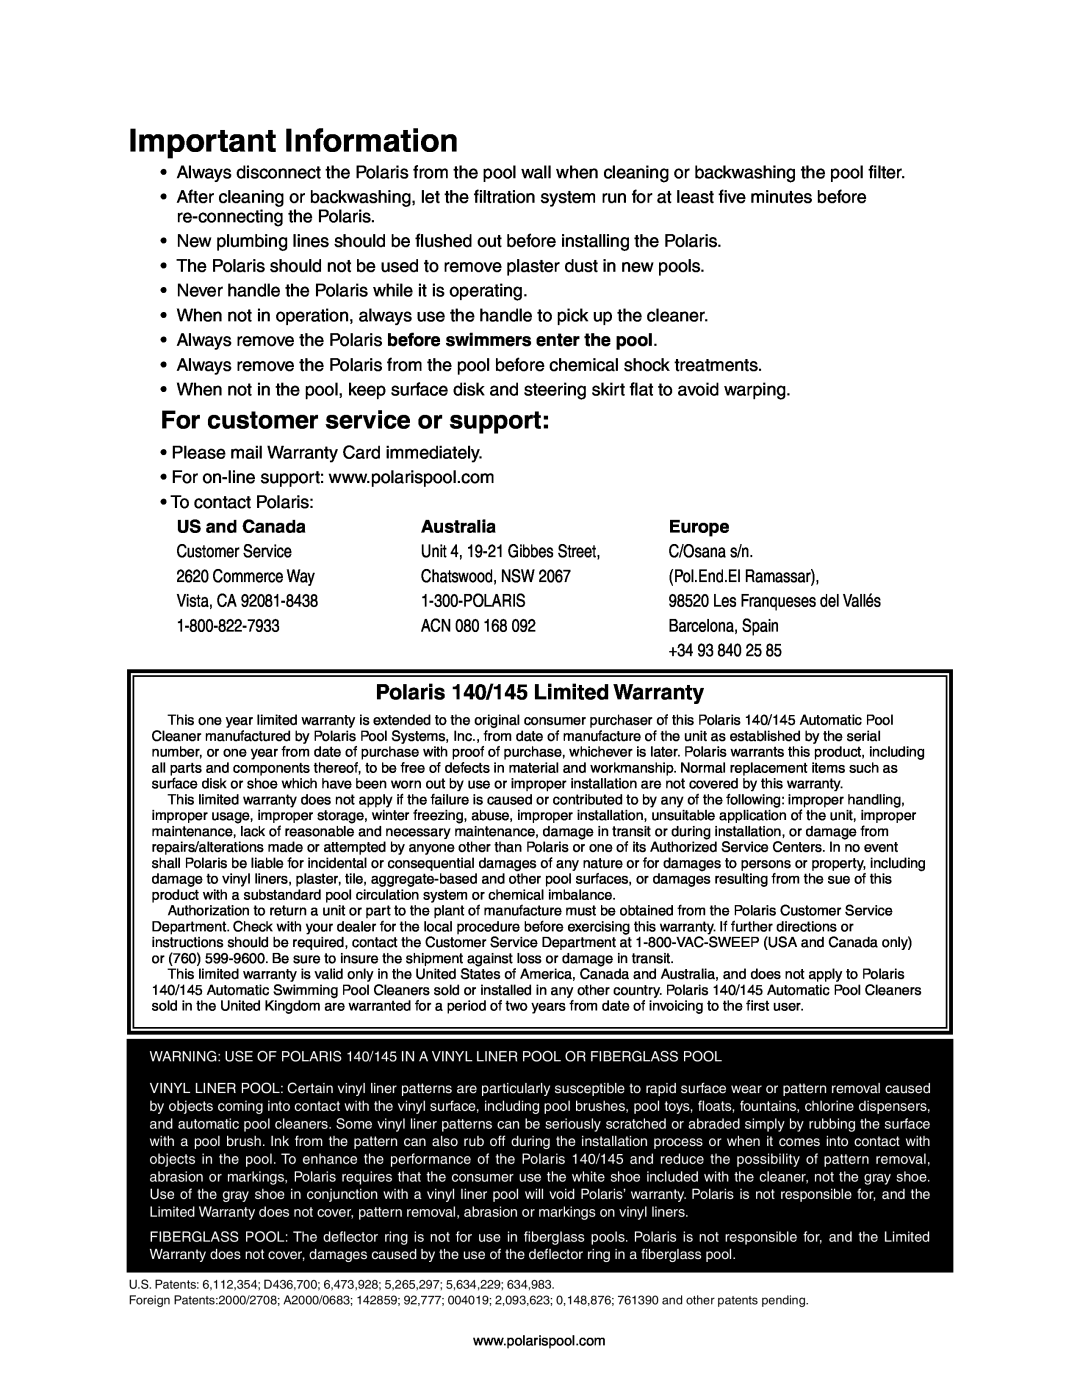 Polaris owner manual Important Information, For customer service or support, Polaris 140/145 Limited Warranty 